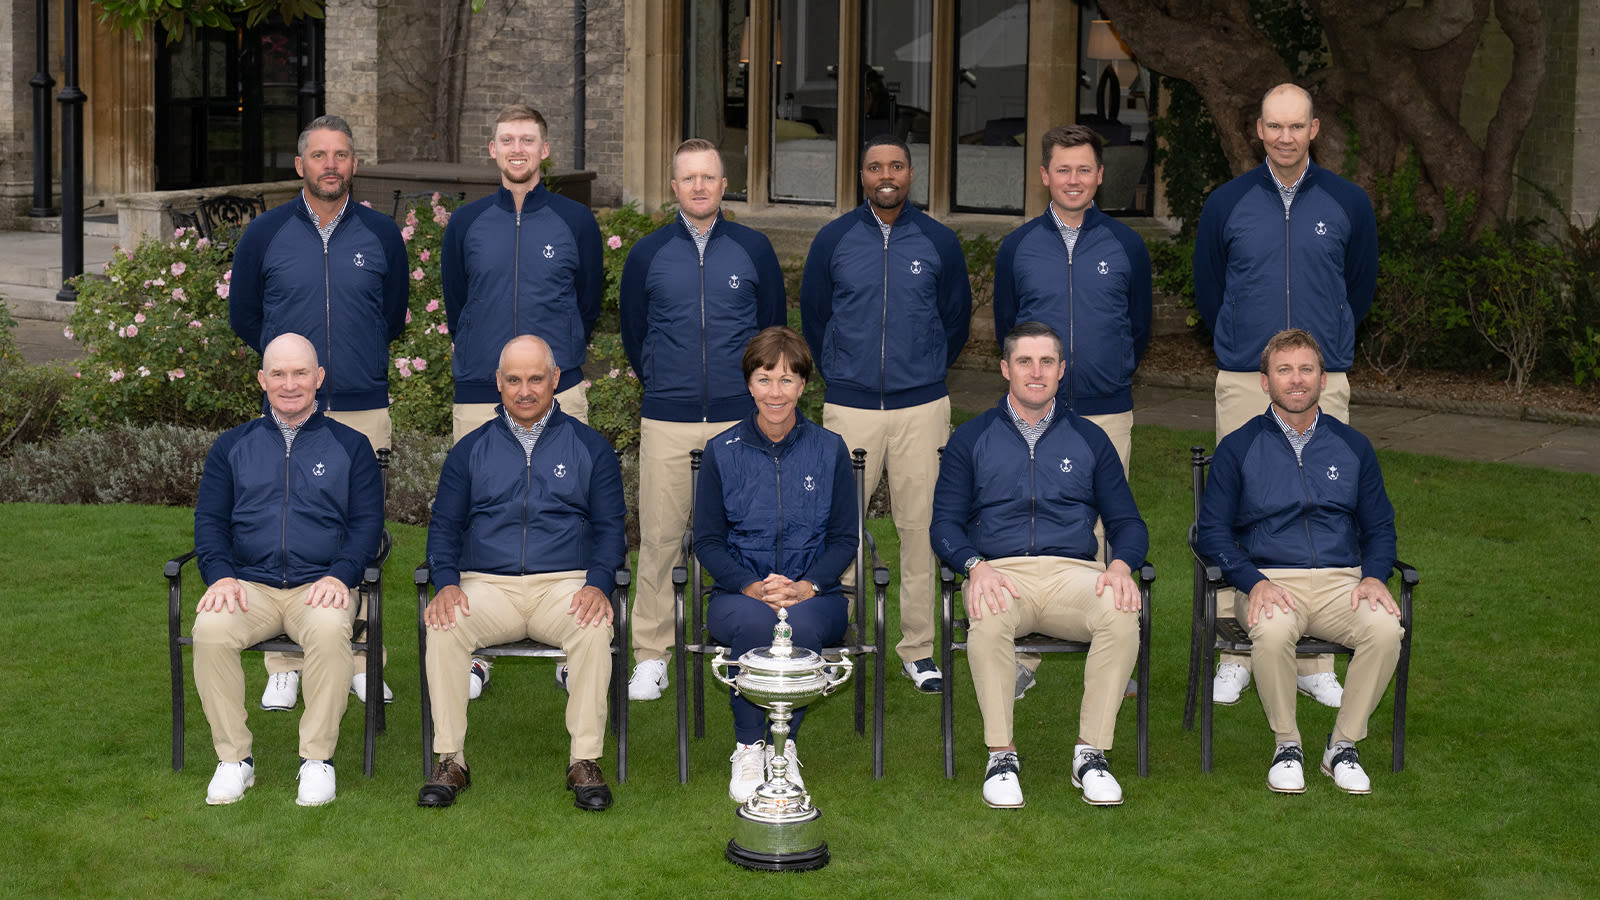 (Back row); Michael Block of the United States, Larkin Gross of the United States, Ryan Vermeer of the United States, Wyatt Worthington II of the United States, Ben Polland of the United States and Jared Jones (Front Row); Frank Bensel Jr. of the United States, Omar Uresti of the United States, Captain and PGA of America Honorary President, Suzy Whaley, Alex Beach of the United States and Jesse Mueller of the United States pose with the Llandudno trophy during the 30th PGA Cup at Foxhills Golf Club on September 15, 2022 in Ottershaw, England. (Photo by Matthew Harris/PGA of America)